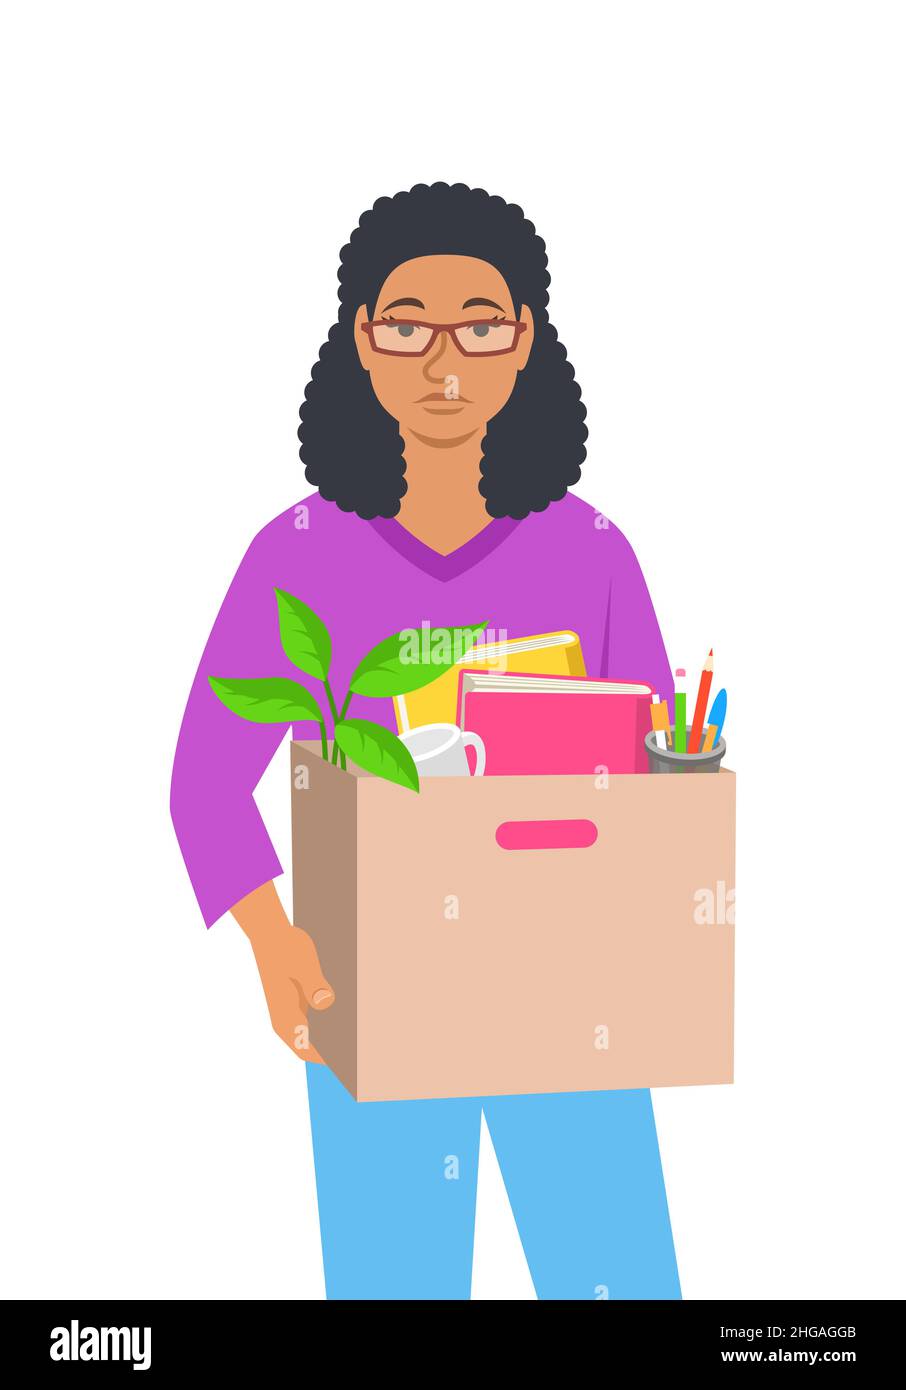 Unemployed fired black woman. Sad jobless female teacher holds box with personal stuff. Unhappy upset face worried about job loss. Staff reduction dur Stock Vector